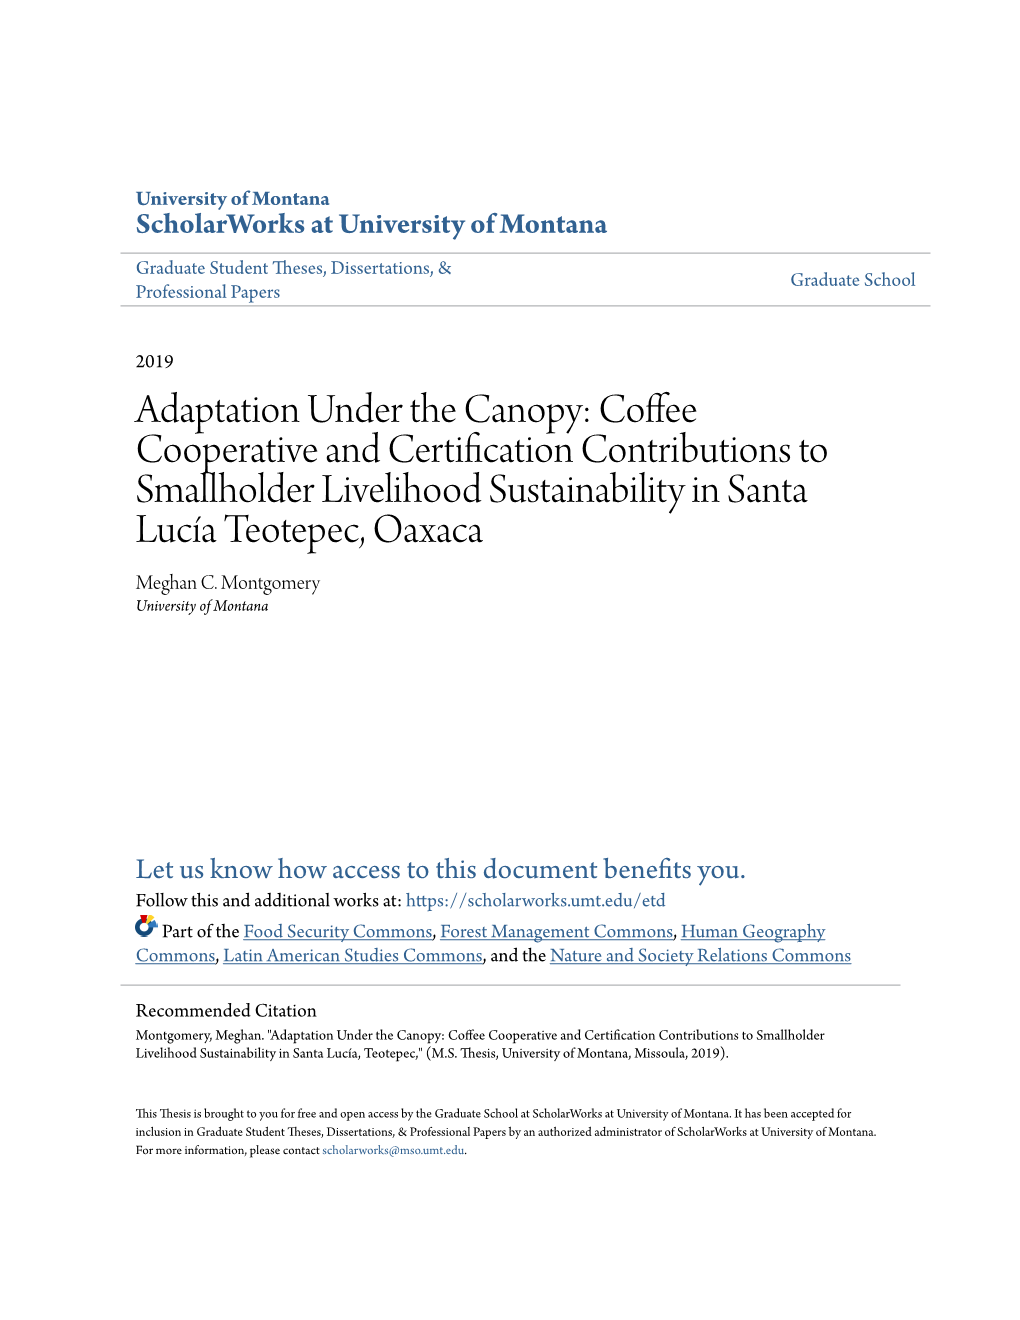 Adaptation Under the Canopy: Coffee Cooperative and Certification Contributions to Smallholder Livelihood Sustainability in Santa Lucía Teotepec, Oaxaca Meghan C